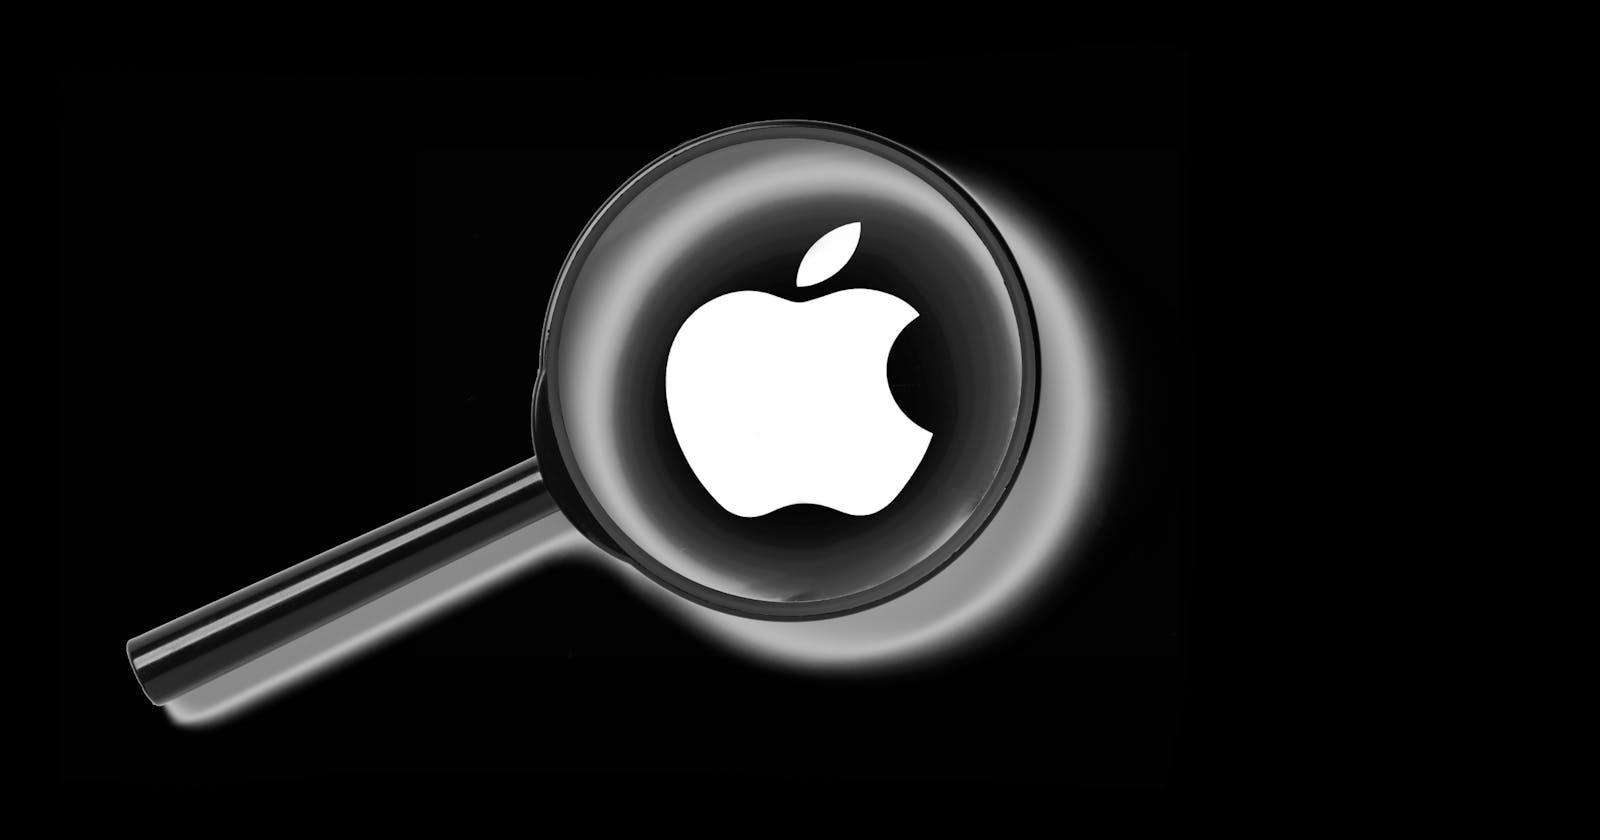 How Apple Can Make Money Through a Search Engine